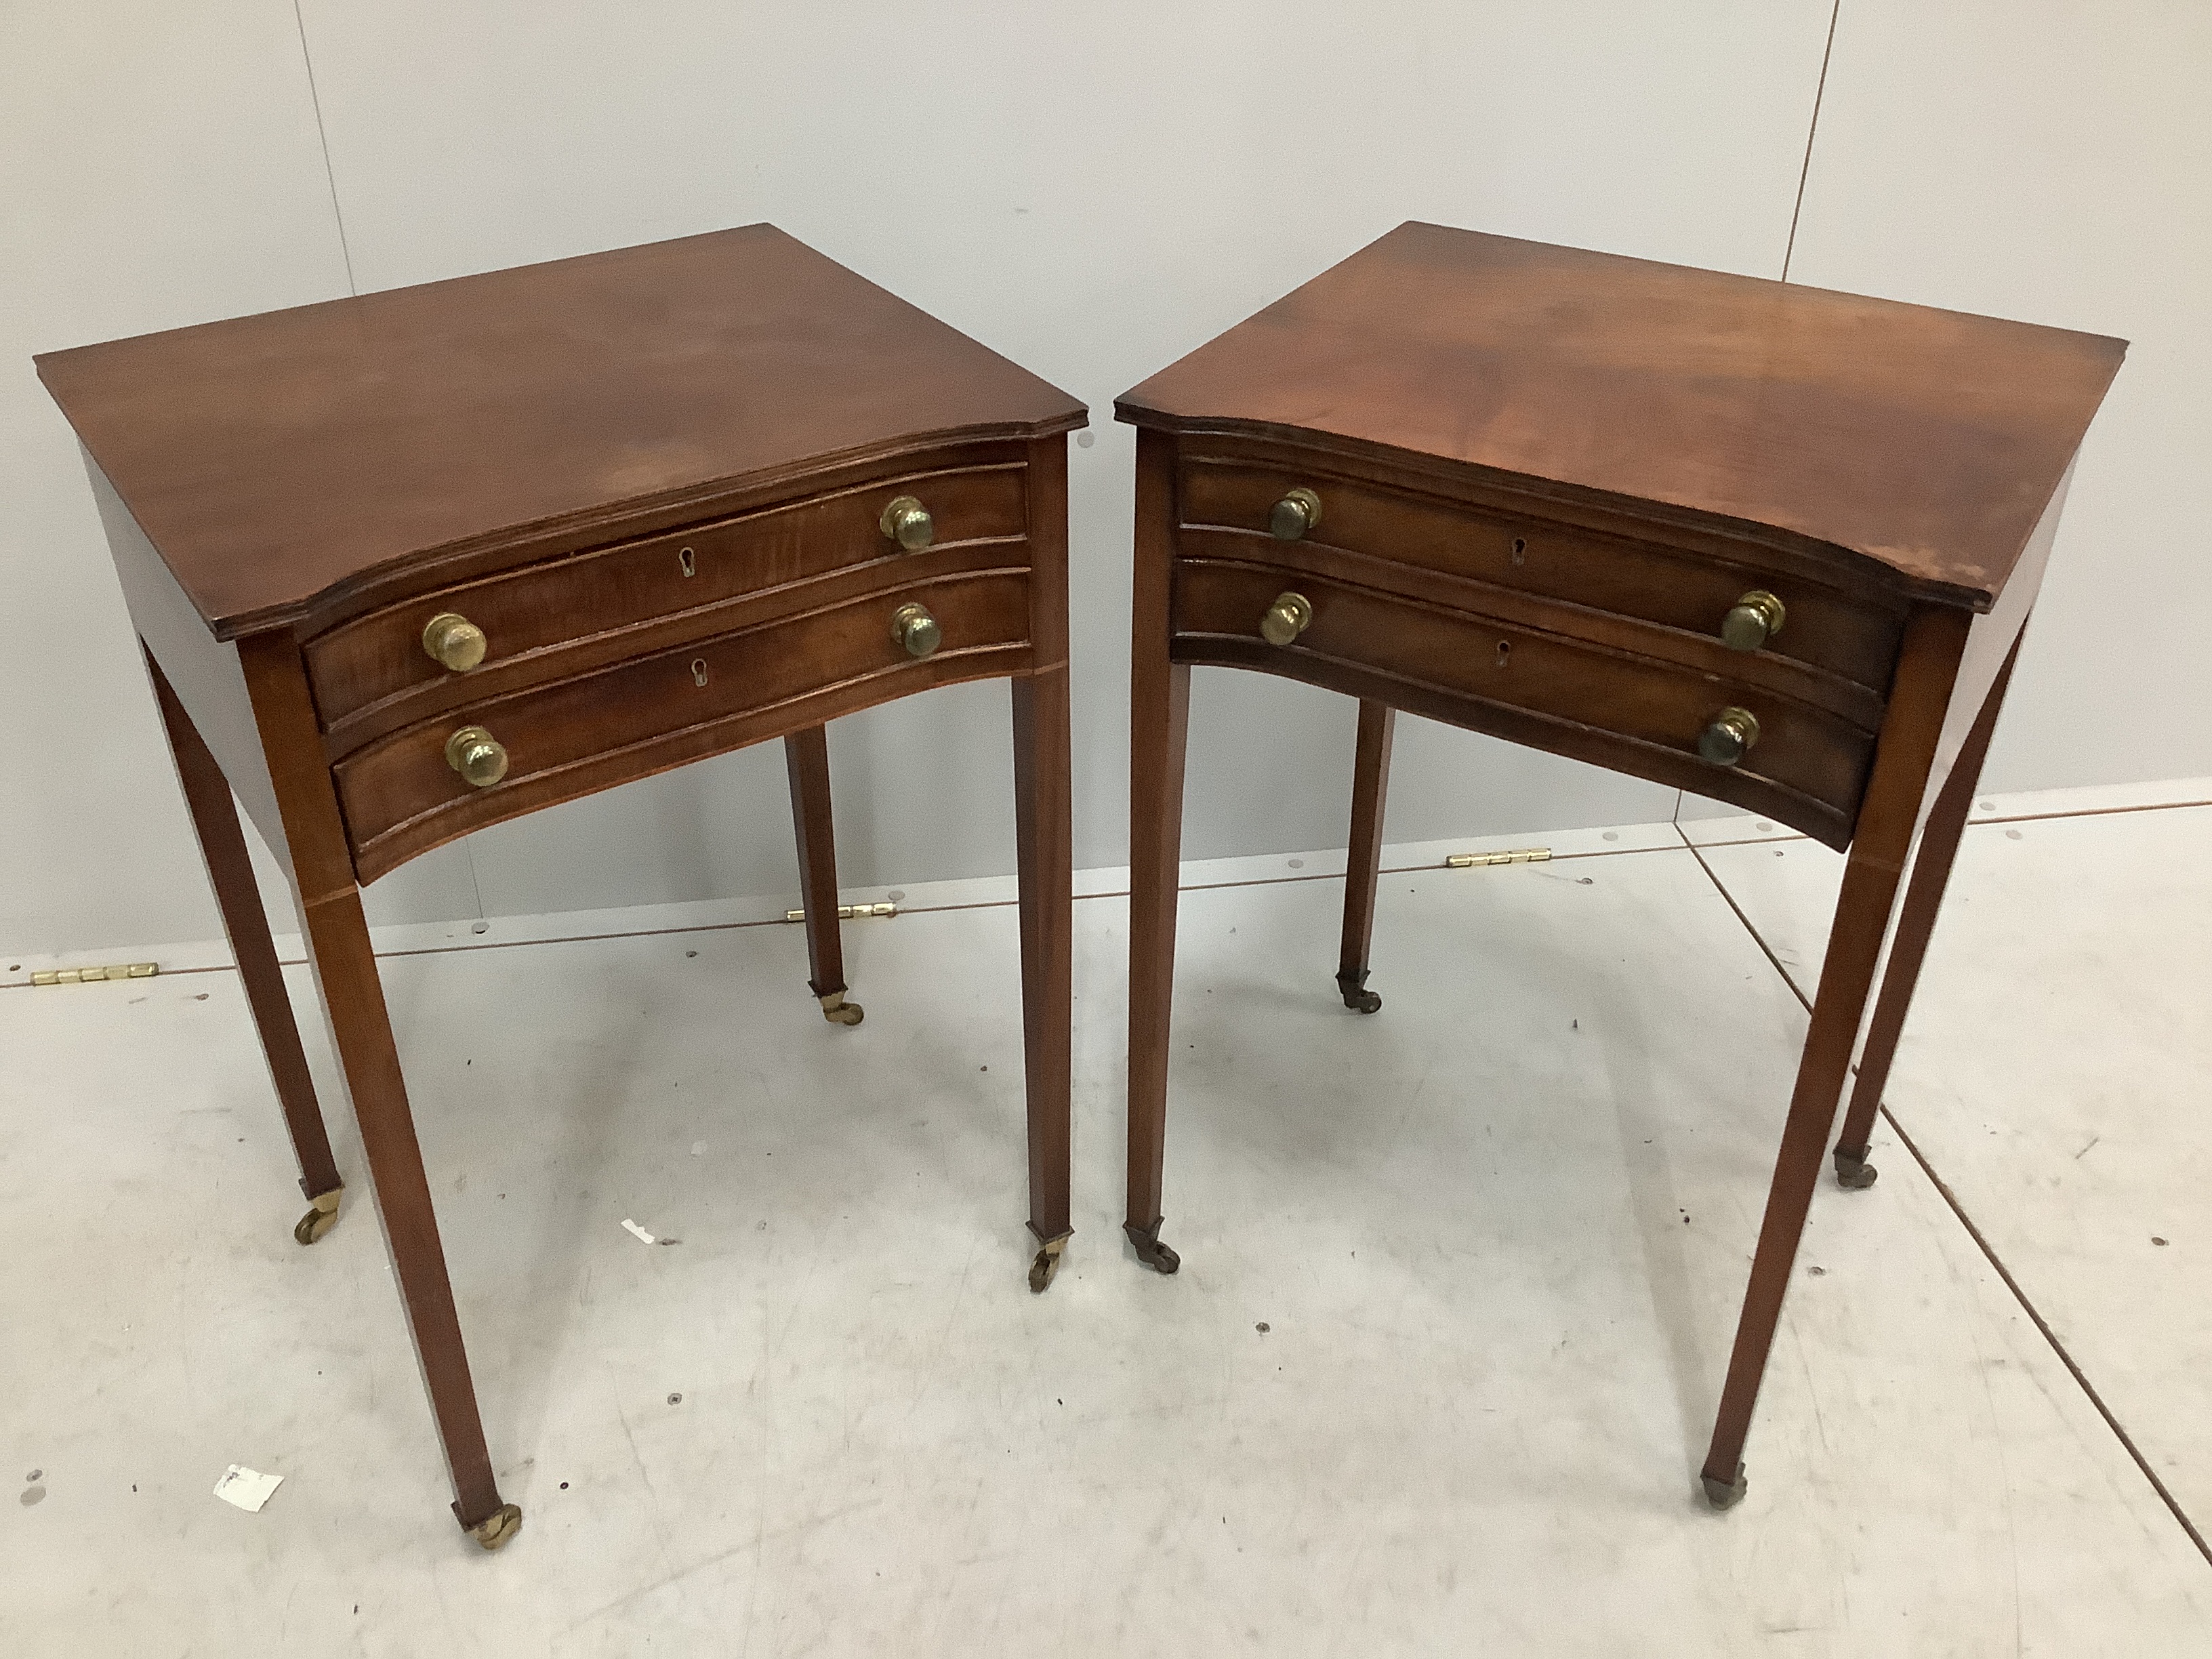 A pair of reproduction George III style mahogany two drawer bedside tables, width 49cm, depth 42cm, height 72cm